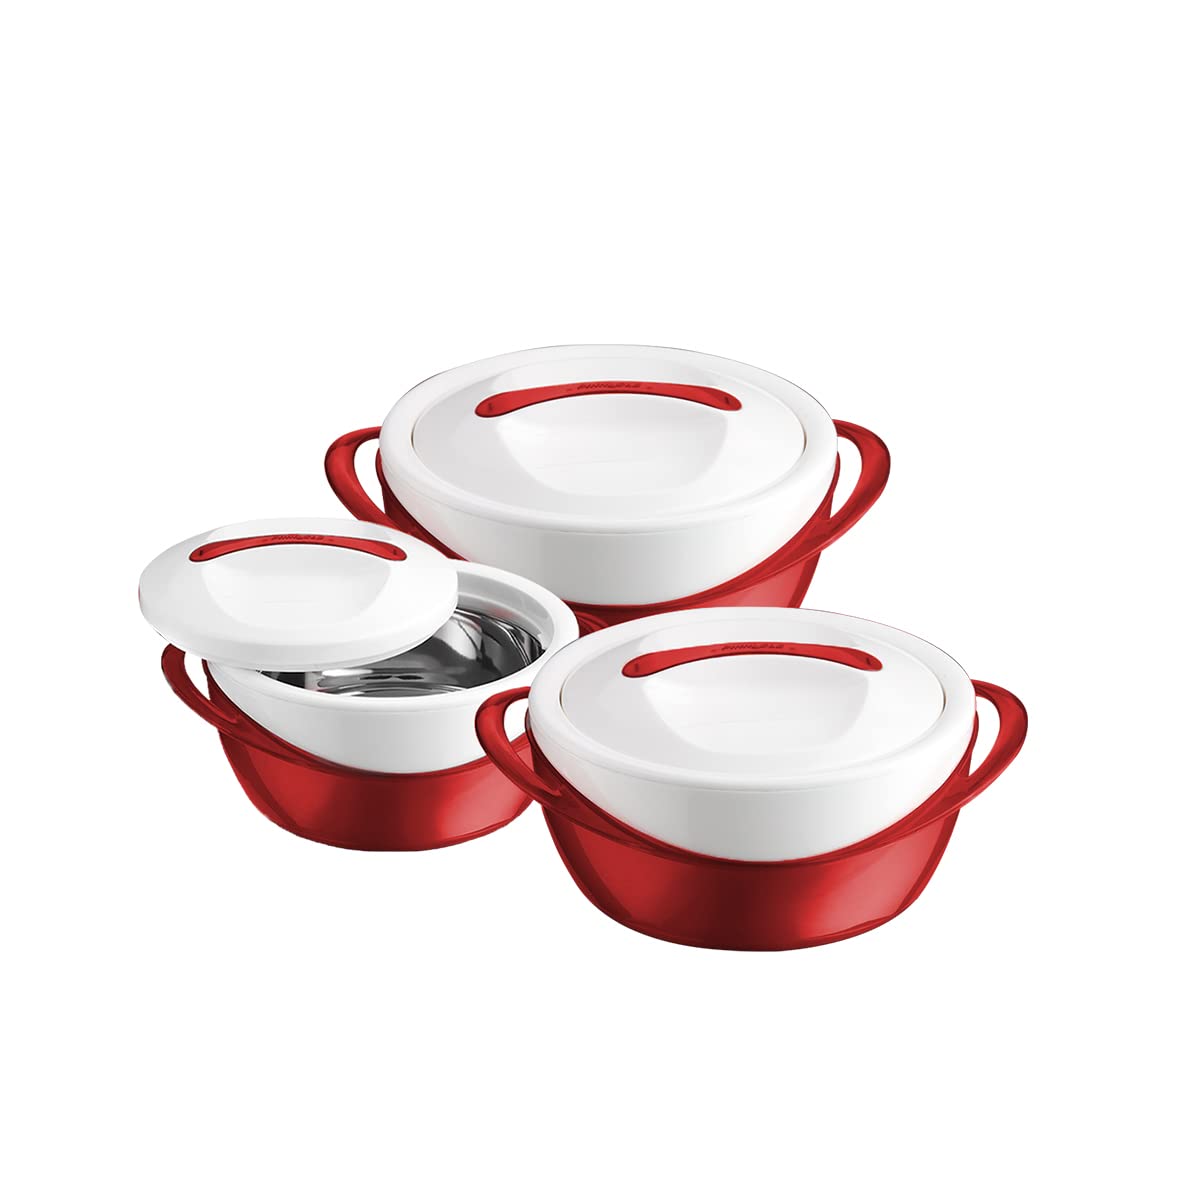 Pinnacle Panache Inner Stainless Steel Casserole Set of 3 | 600 ml, 1200 ml, 2500 ml | Hot Box | Roti Box | Ideal as Serving Bowl | Teal (Red)